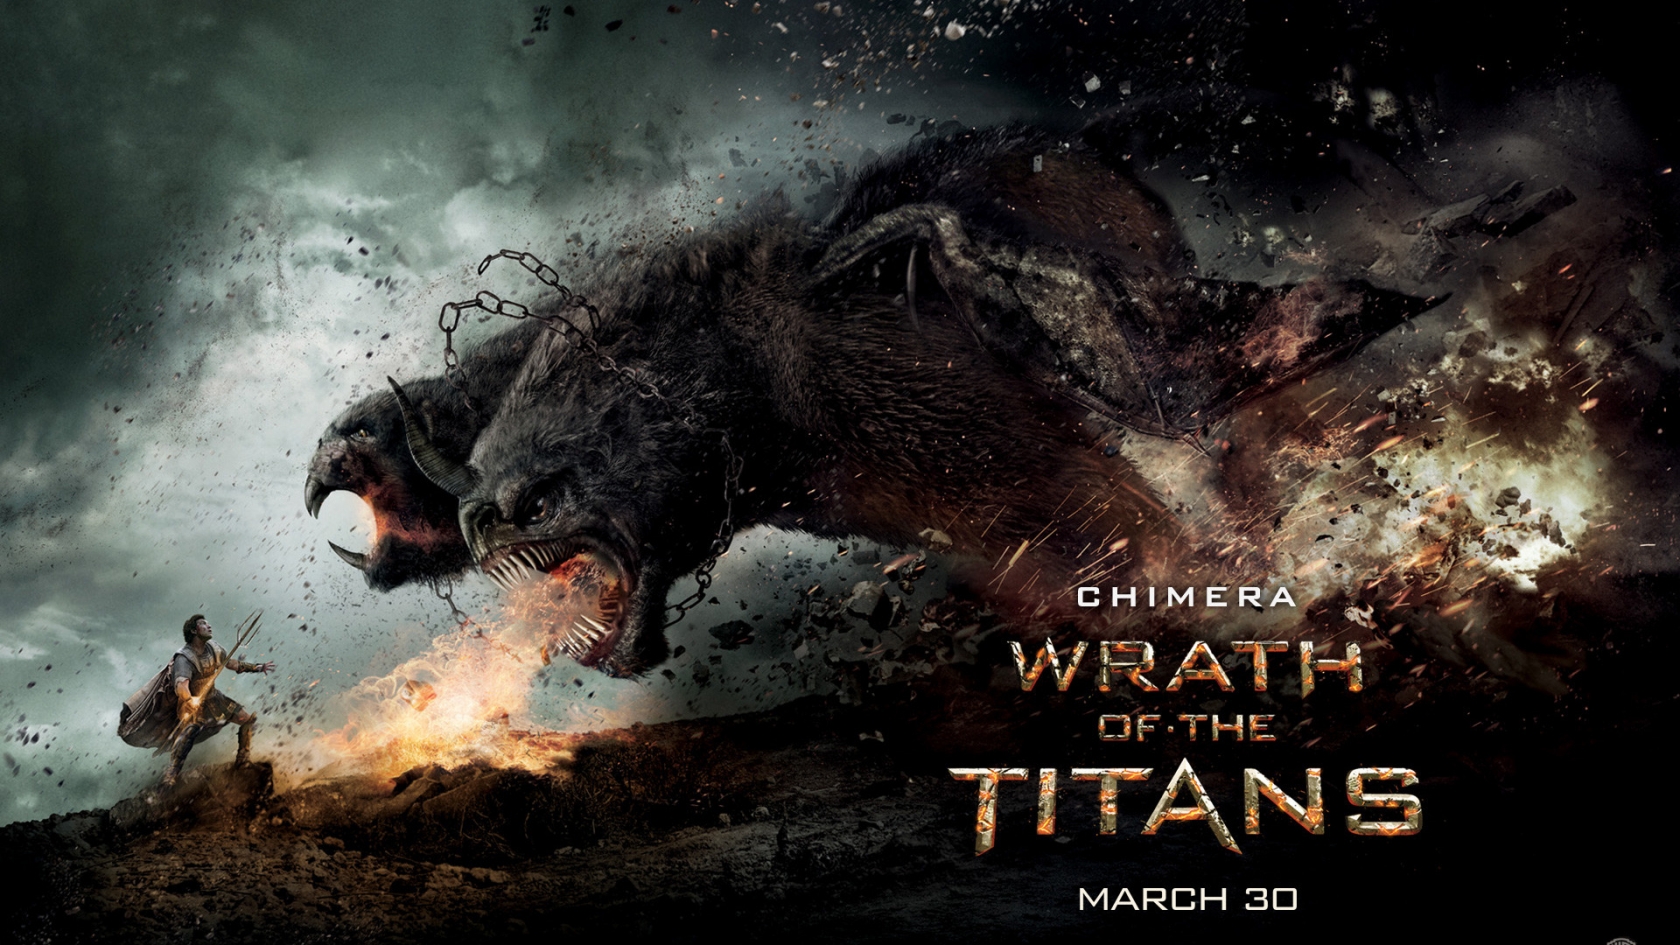 Chimera Wrath of the Titans for 1680 x 945 HDTV resolution